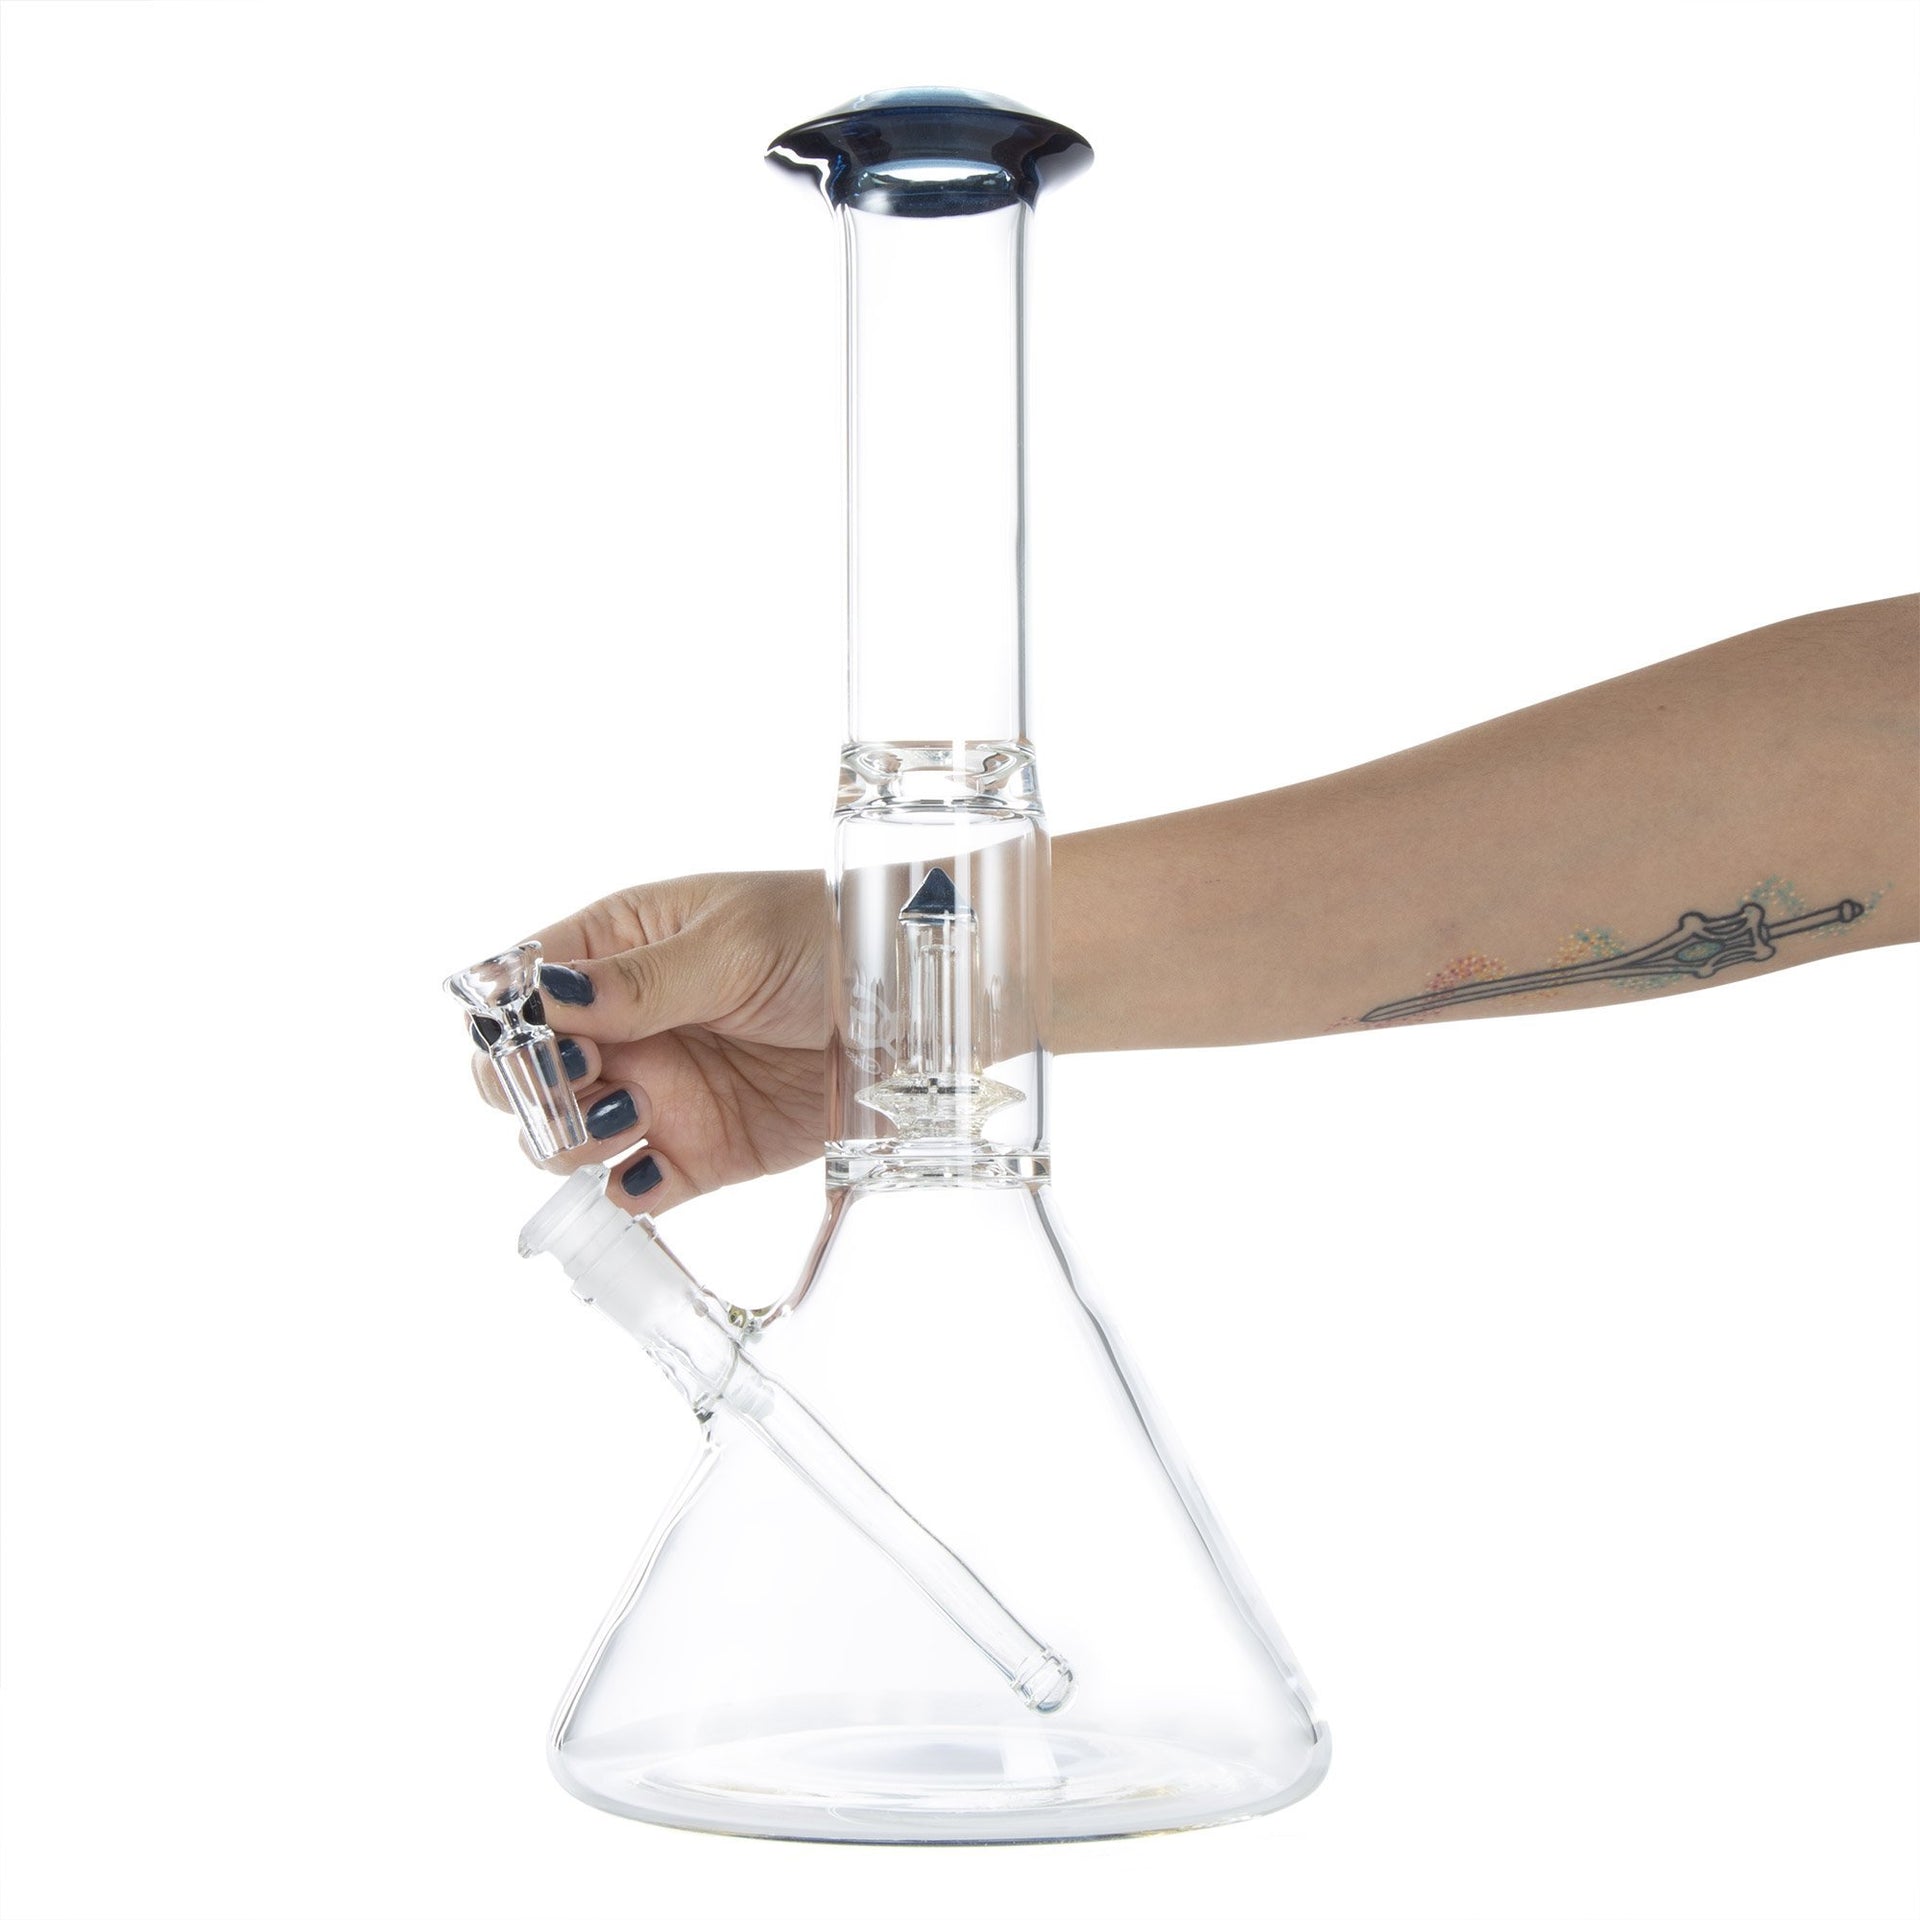 Geo's Glass 14in Crystal Circ Beaker Bong - Atomic Stardust + Blu-V UV Reactive - 420 Science - The most trusted online smoke shop.